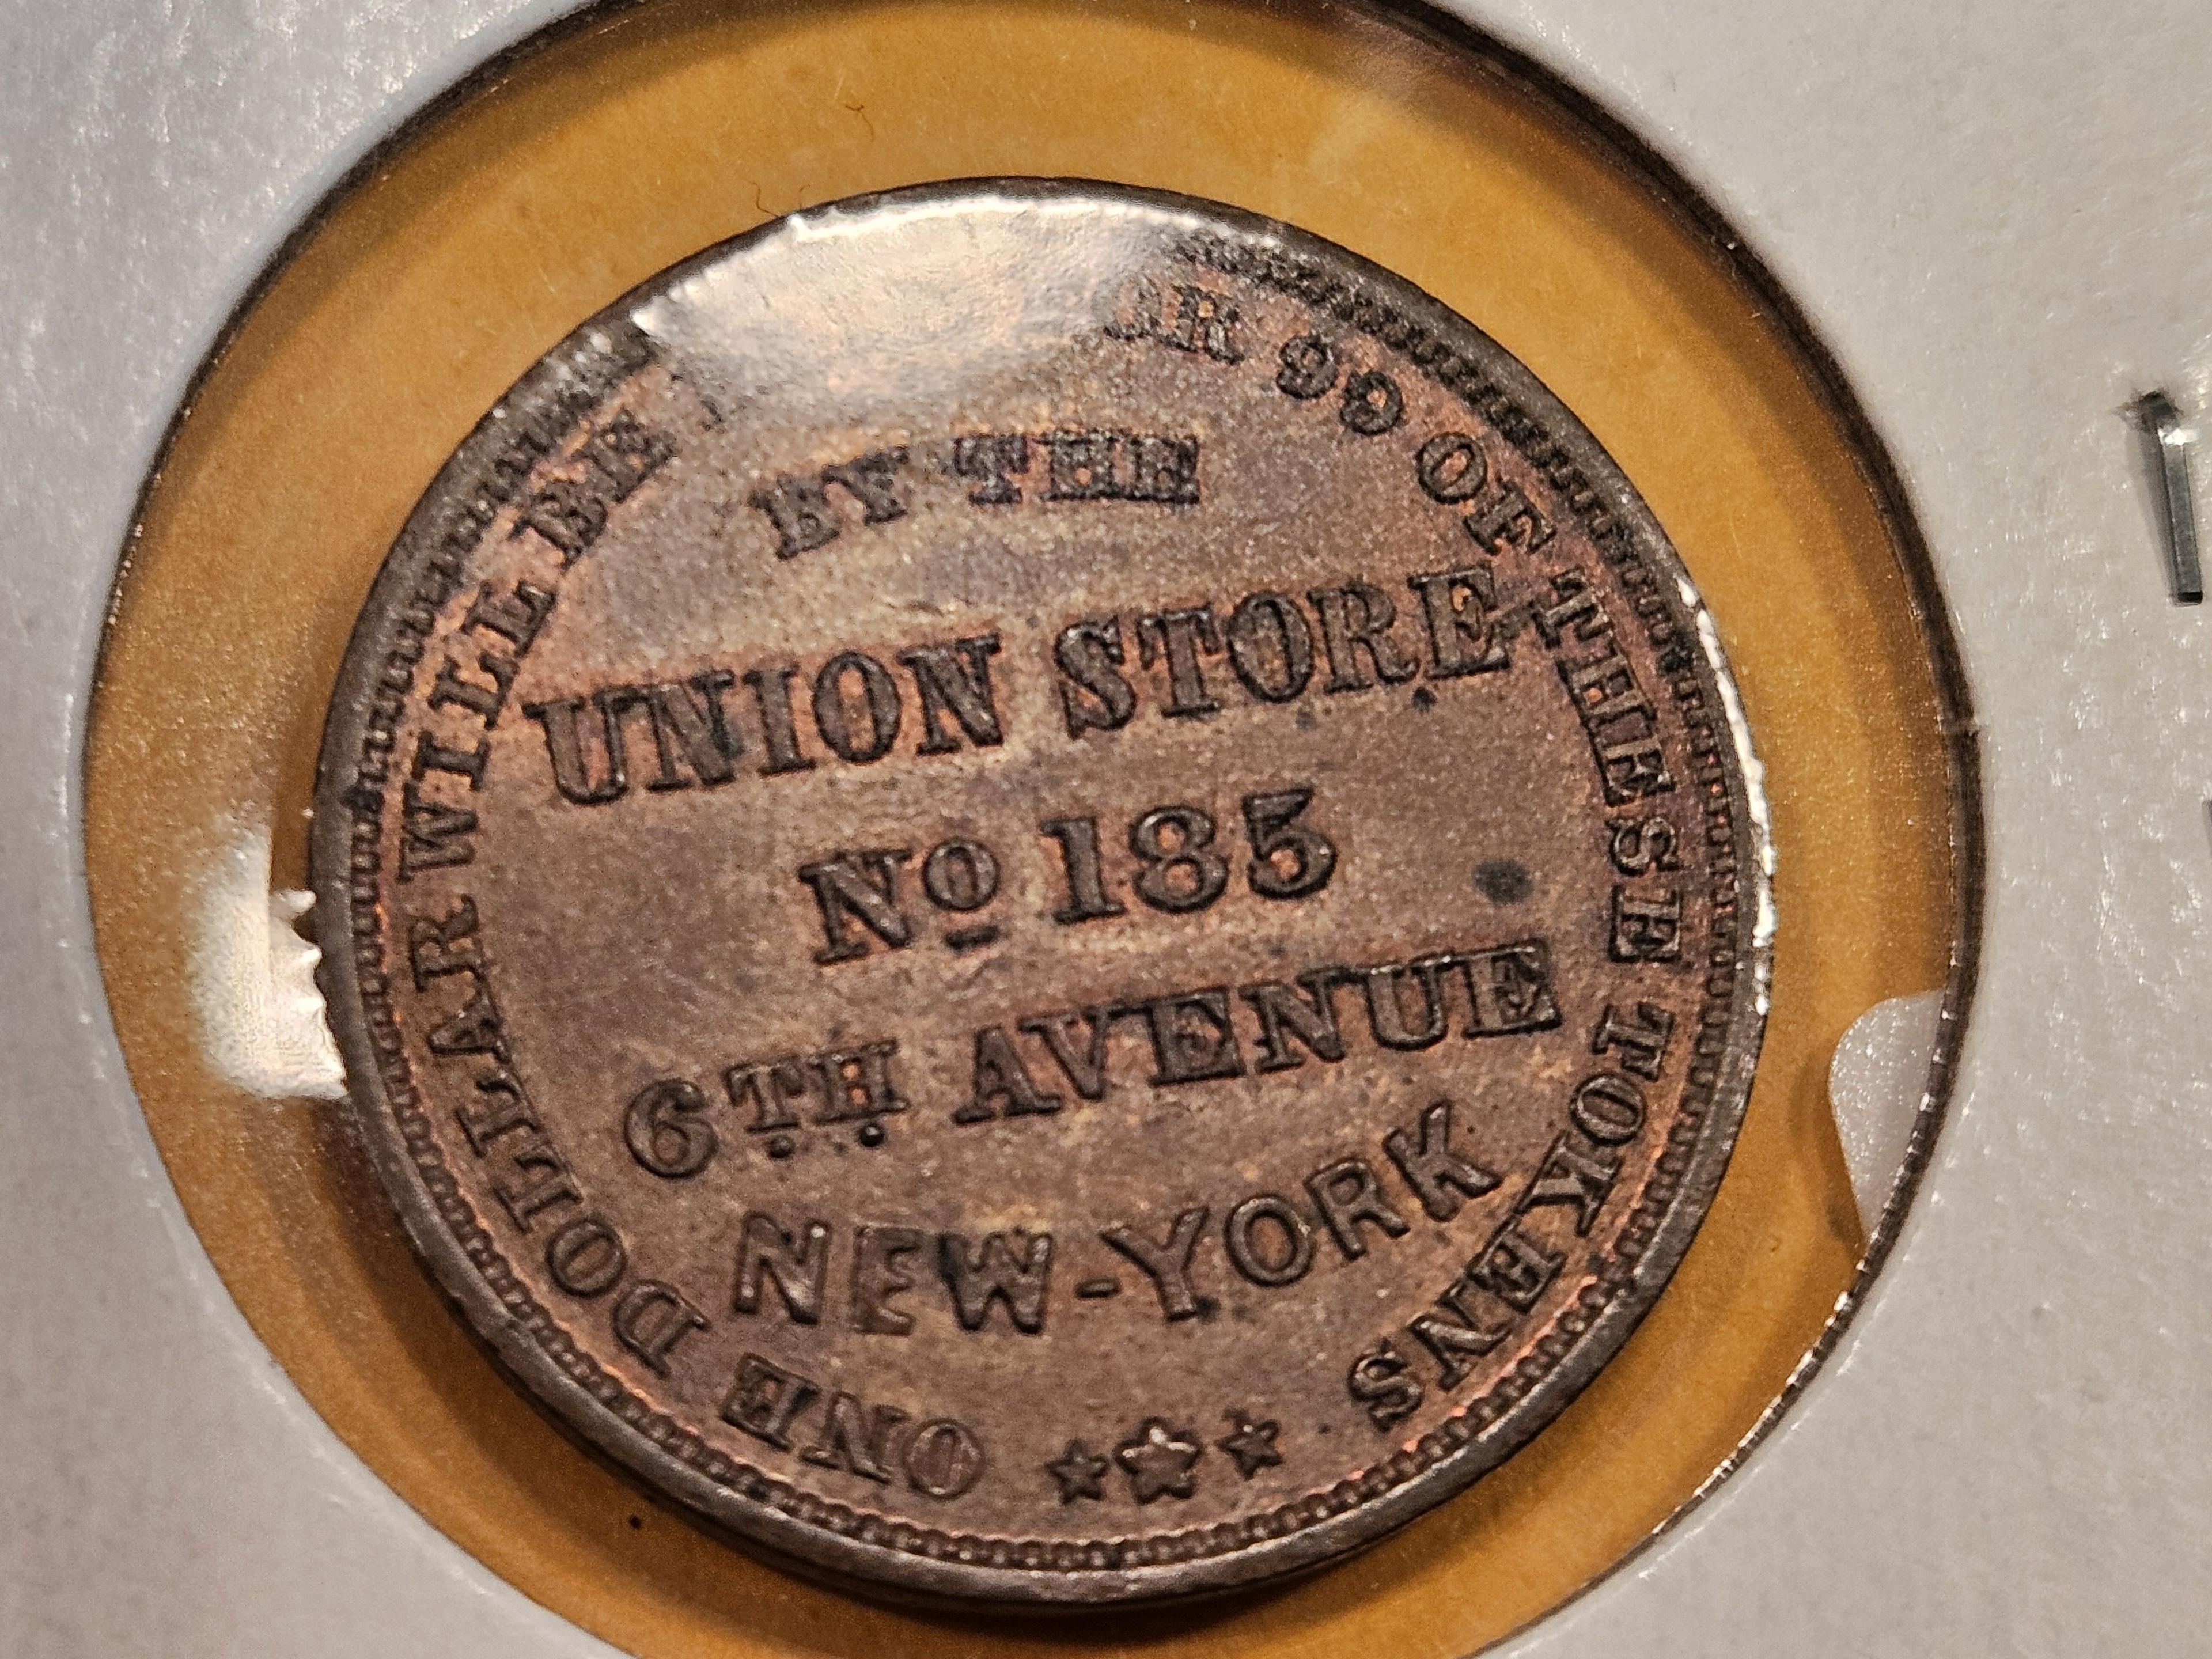 Uncirculated Merchant's Store card from the 1800's